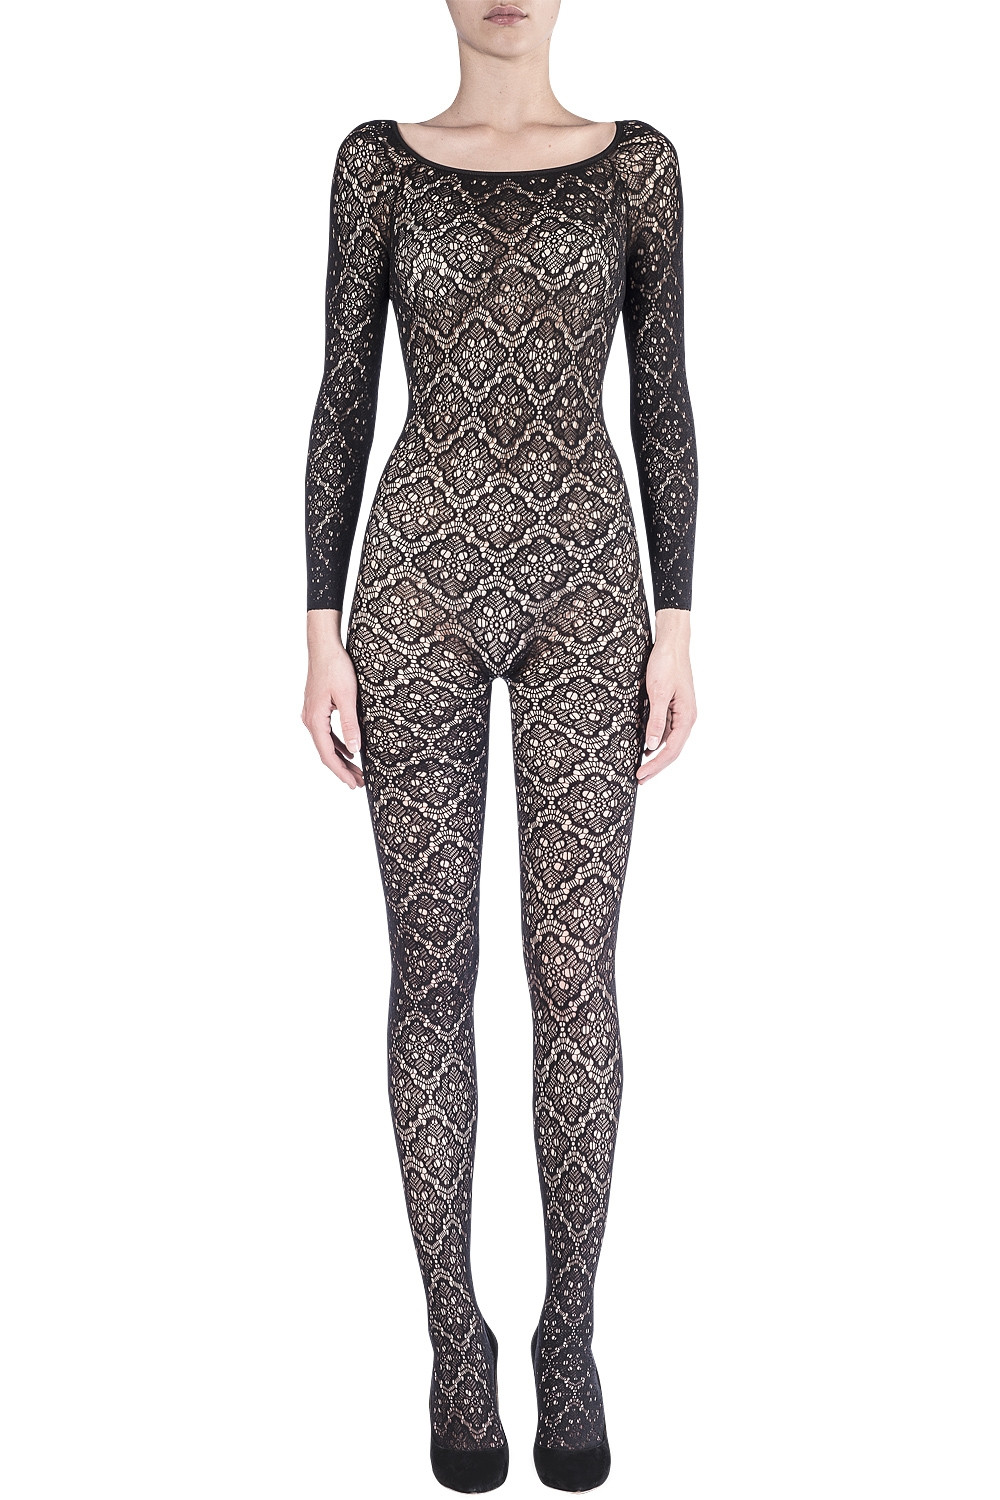 Jumpsuits for Women | Intriguing, seductive bodysuits and bodystockings ...